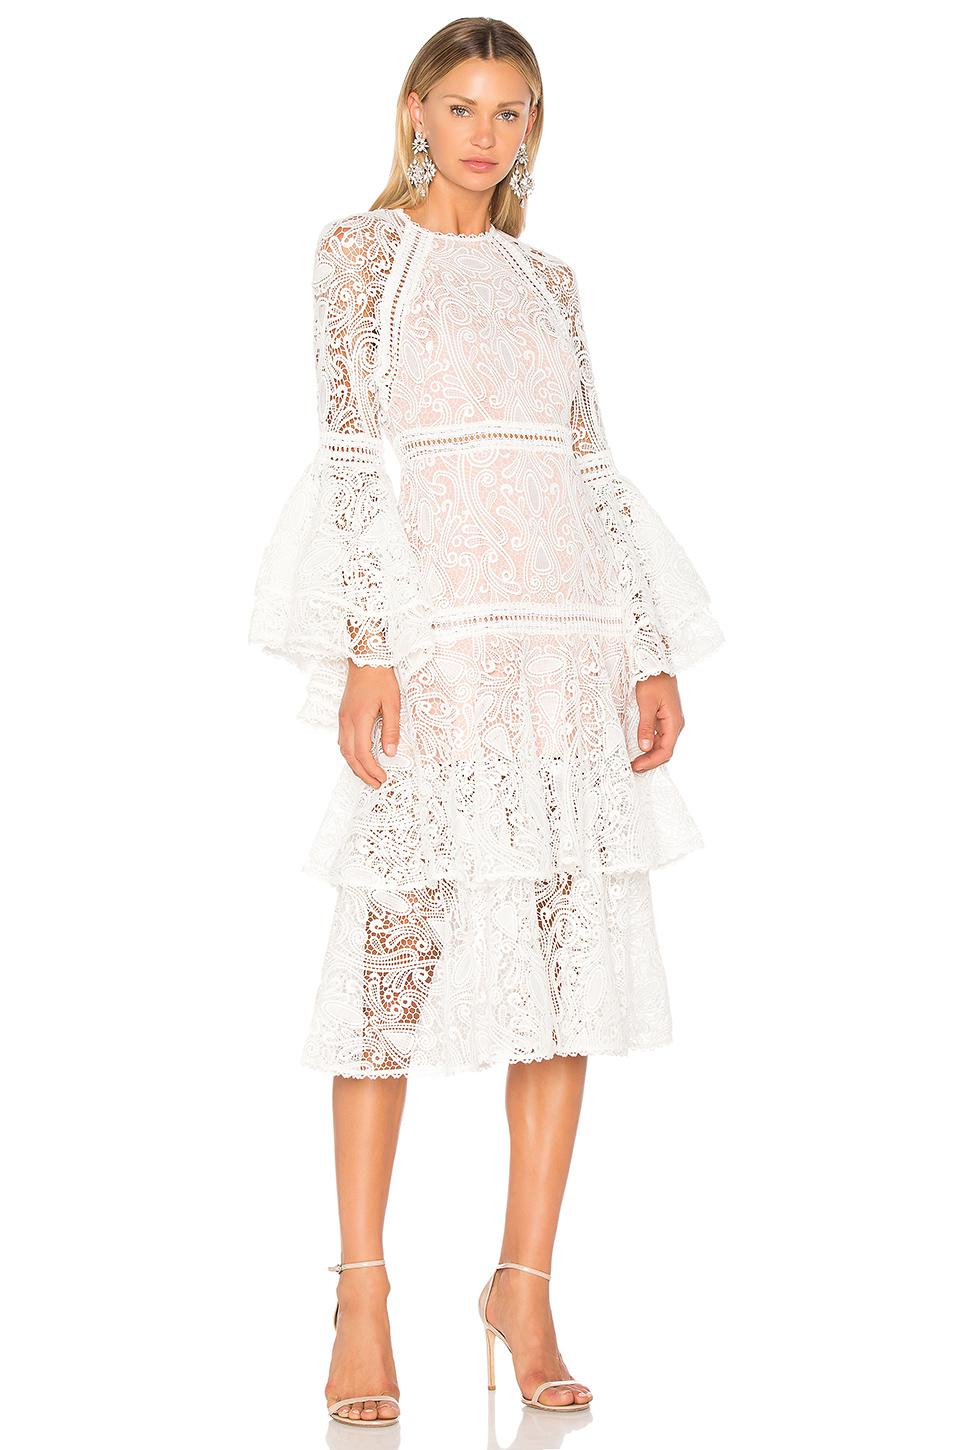 Alexis Lace Luxe Dress in White Lace (White) - Lyst